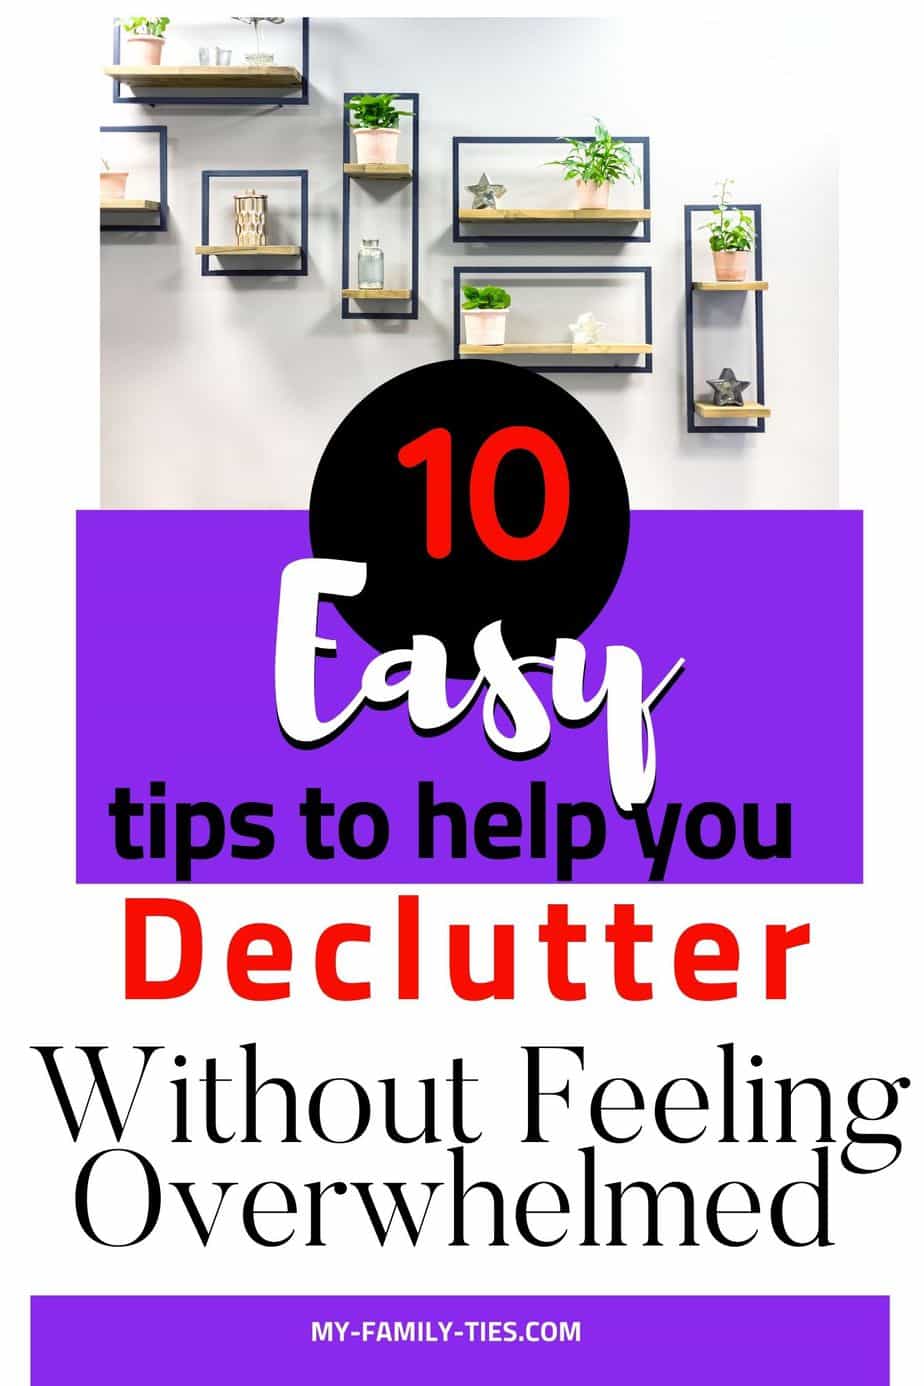 10 Easy tips to declutter your home without feeling overwhelmed or stressed. Manageable steps to create an action plan that works for you and your family to transform your home from chaos to calm. 
www.my-family-ties.com